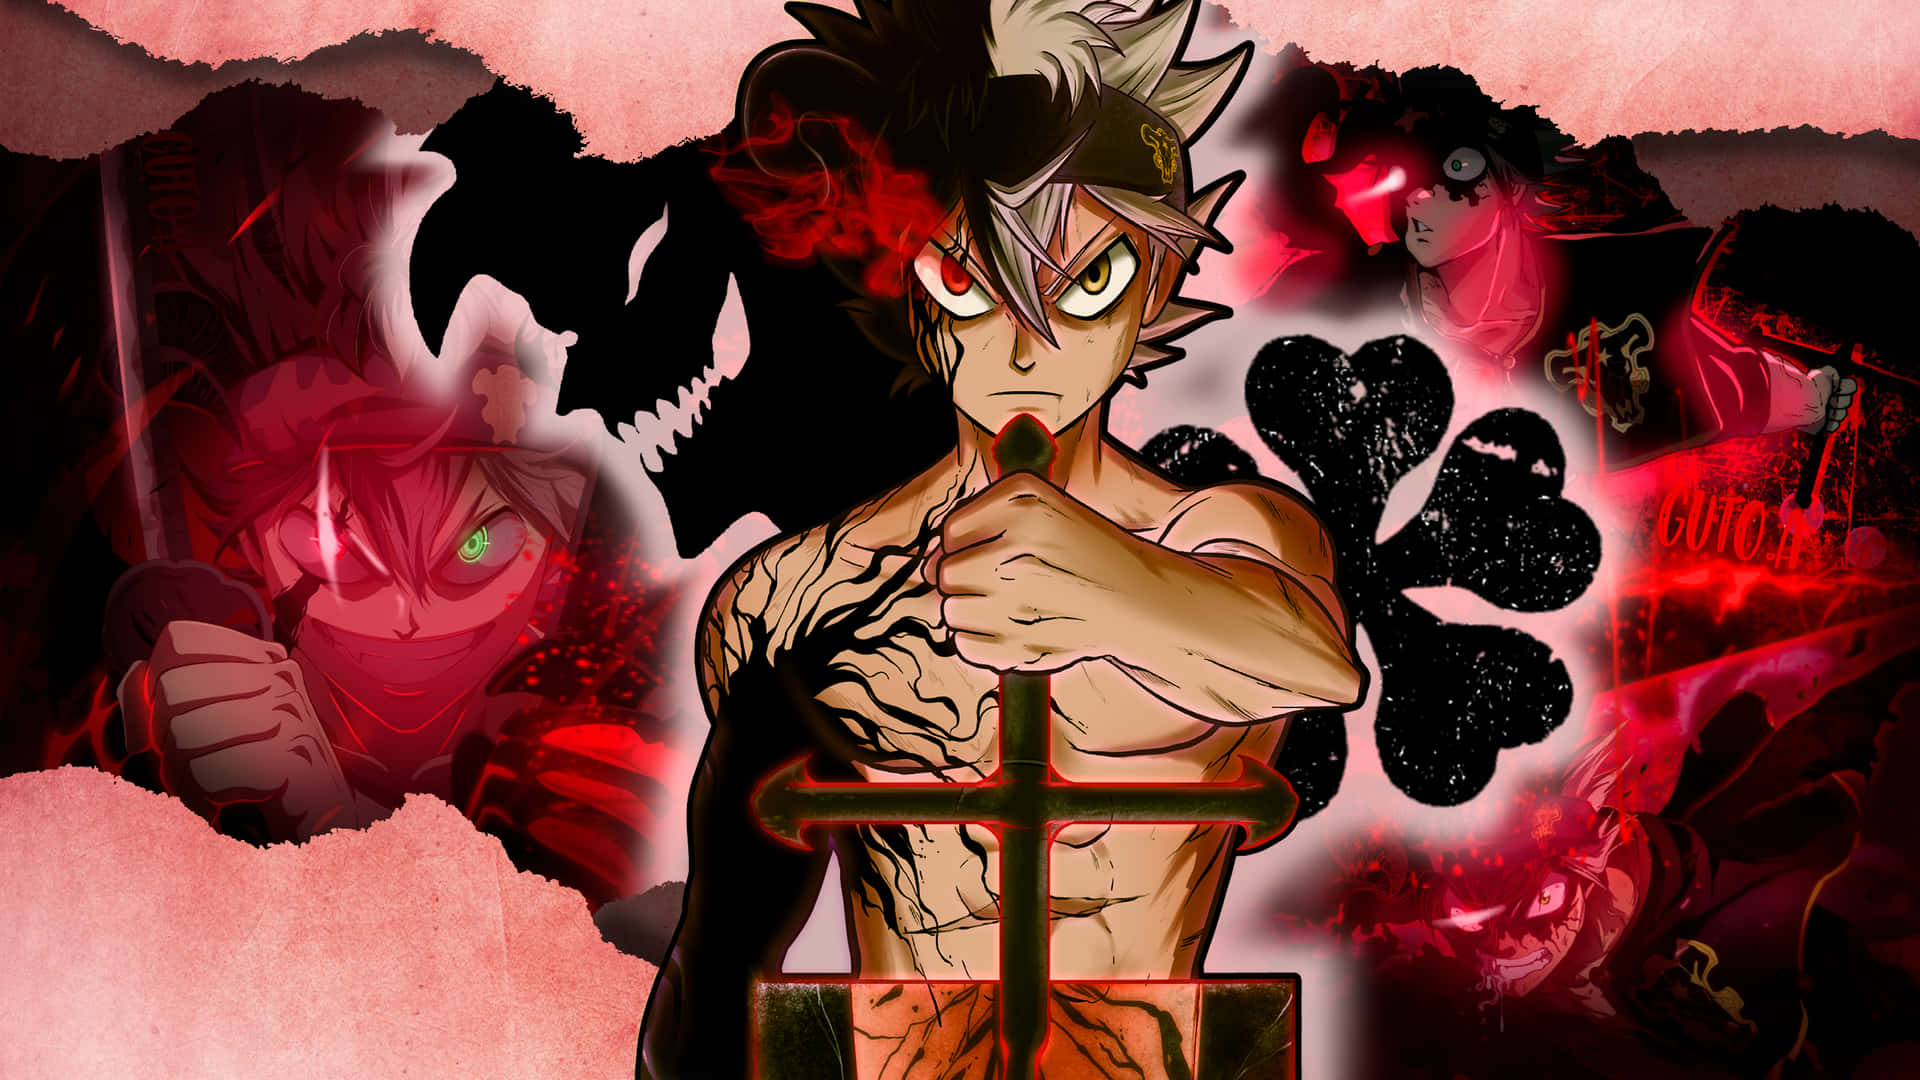 Go Beyond Imagination with Asta in Black Clover